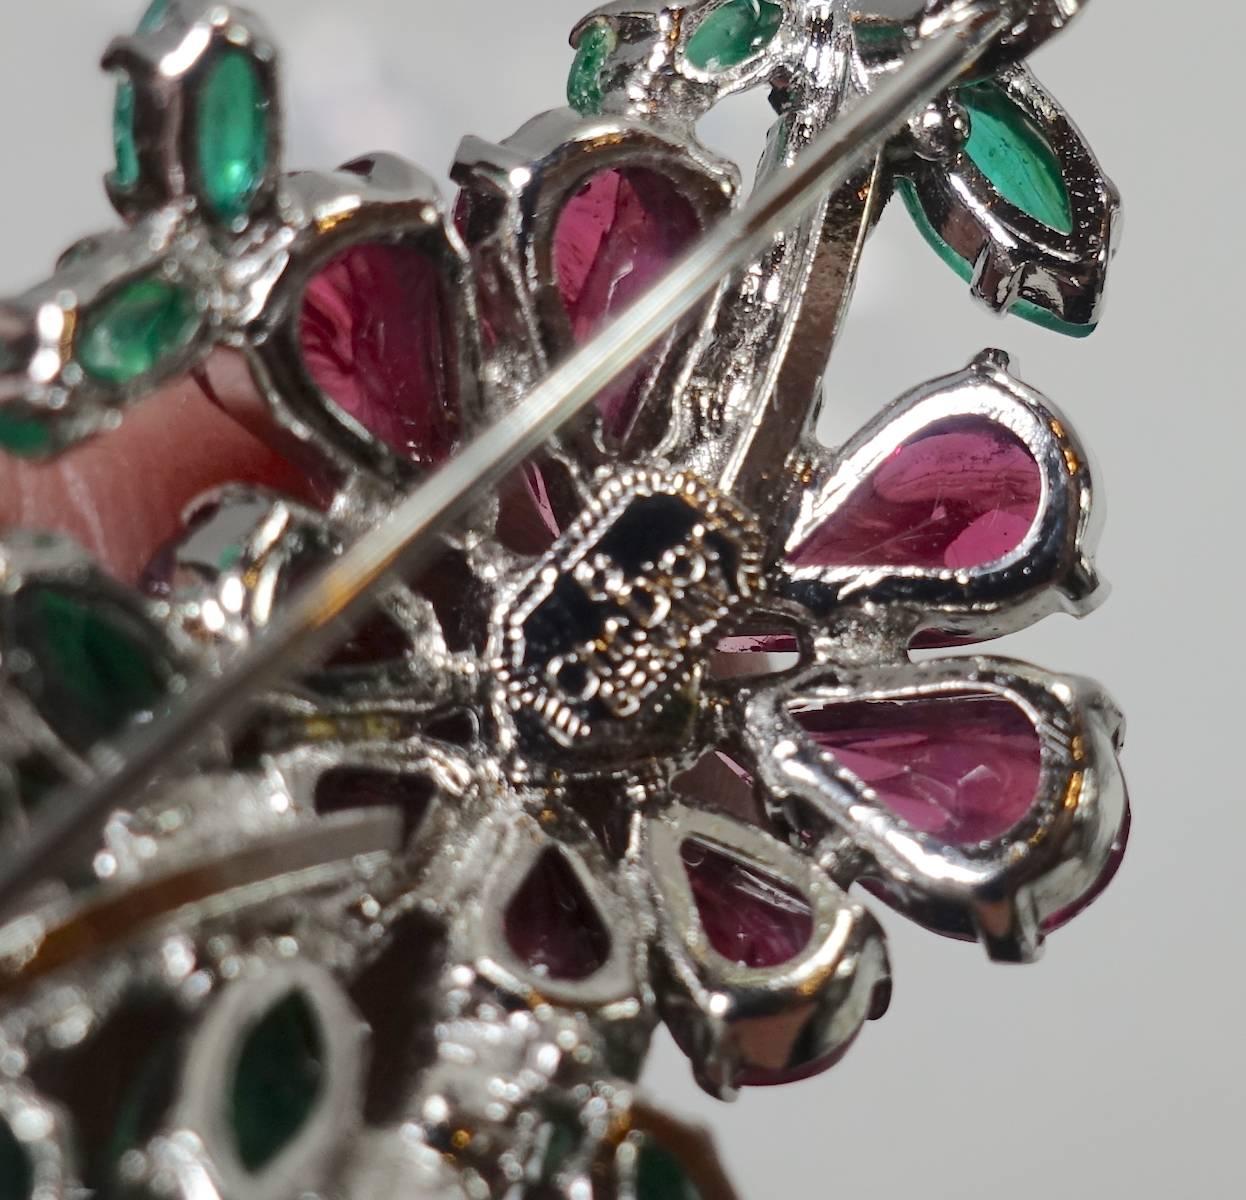 This vintage signed Christian Dior brooch features multi-color rhinestones in a rhodium setting.  This brooch measures 2-1/8” x 1”, is signed “Chr Dior Germany” and is in excellent condition.